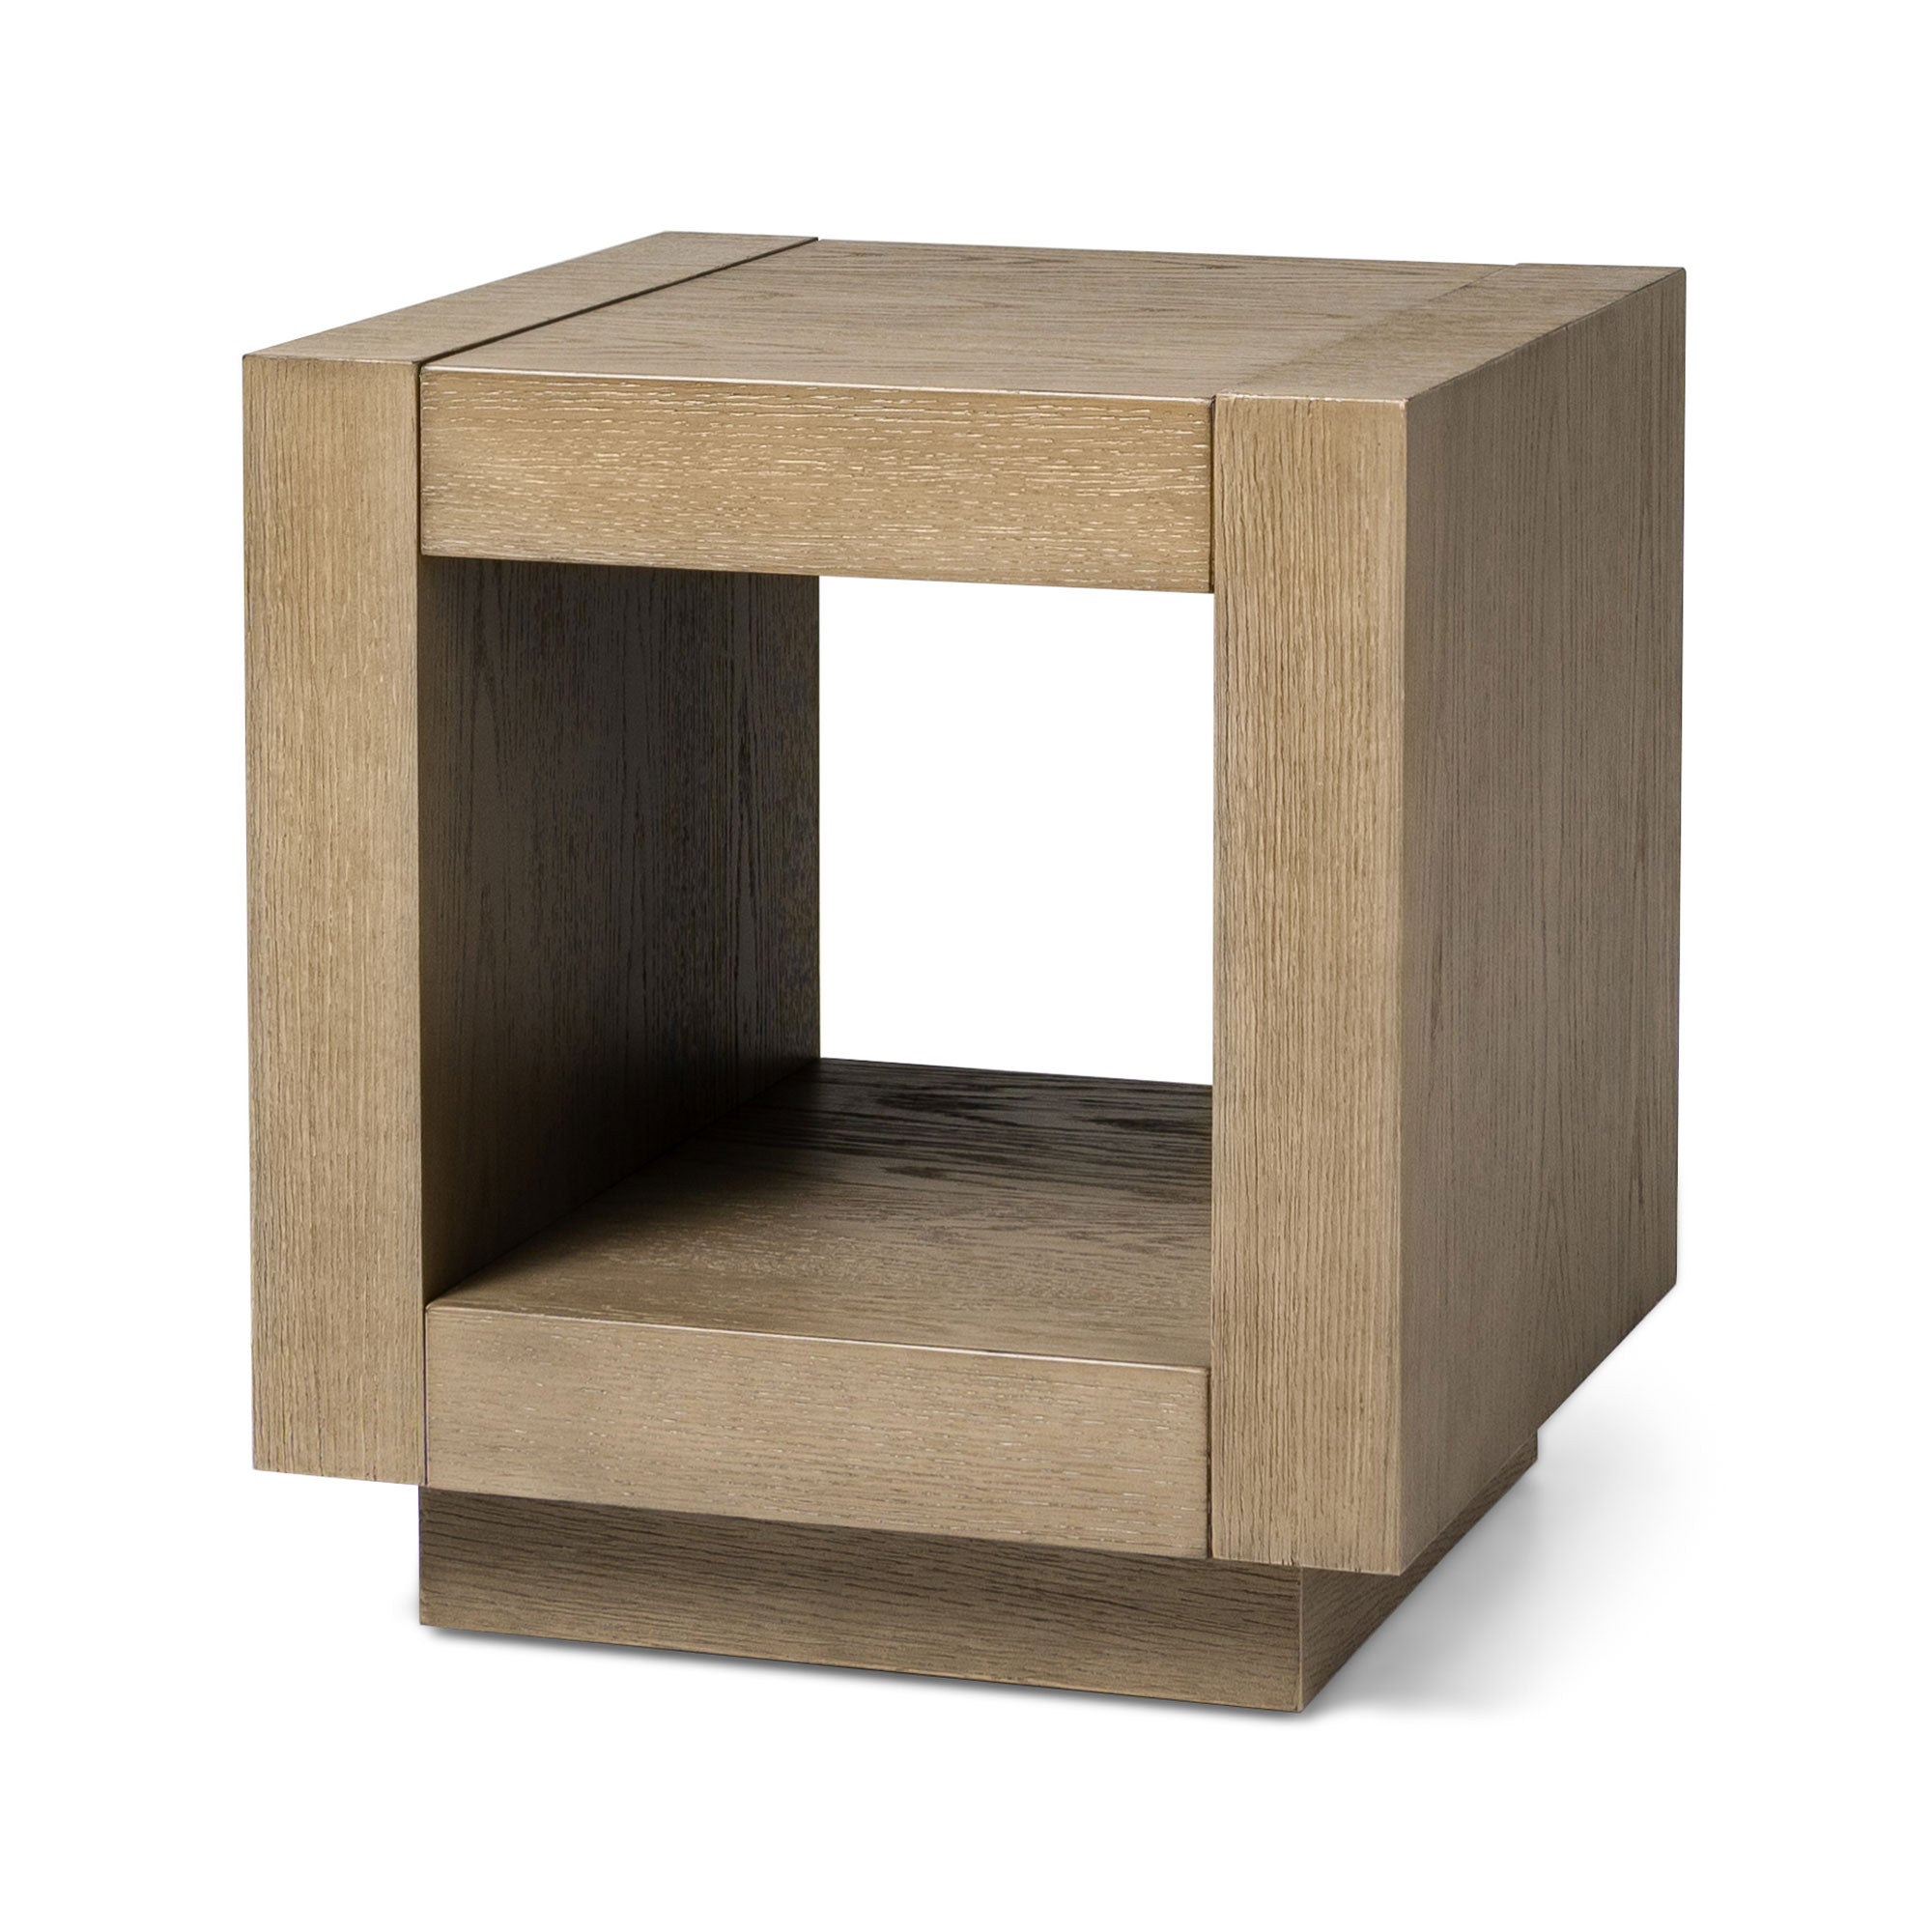 Artemis Contemporary Wooden Side Table in Refined Grey Finish in Furniture | Tables | Accent Tables | End Tables by Maven Lane